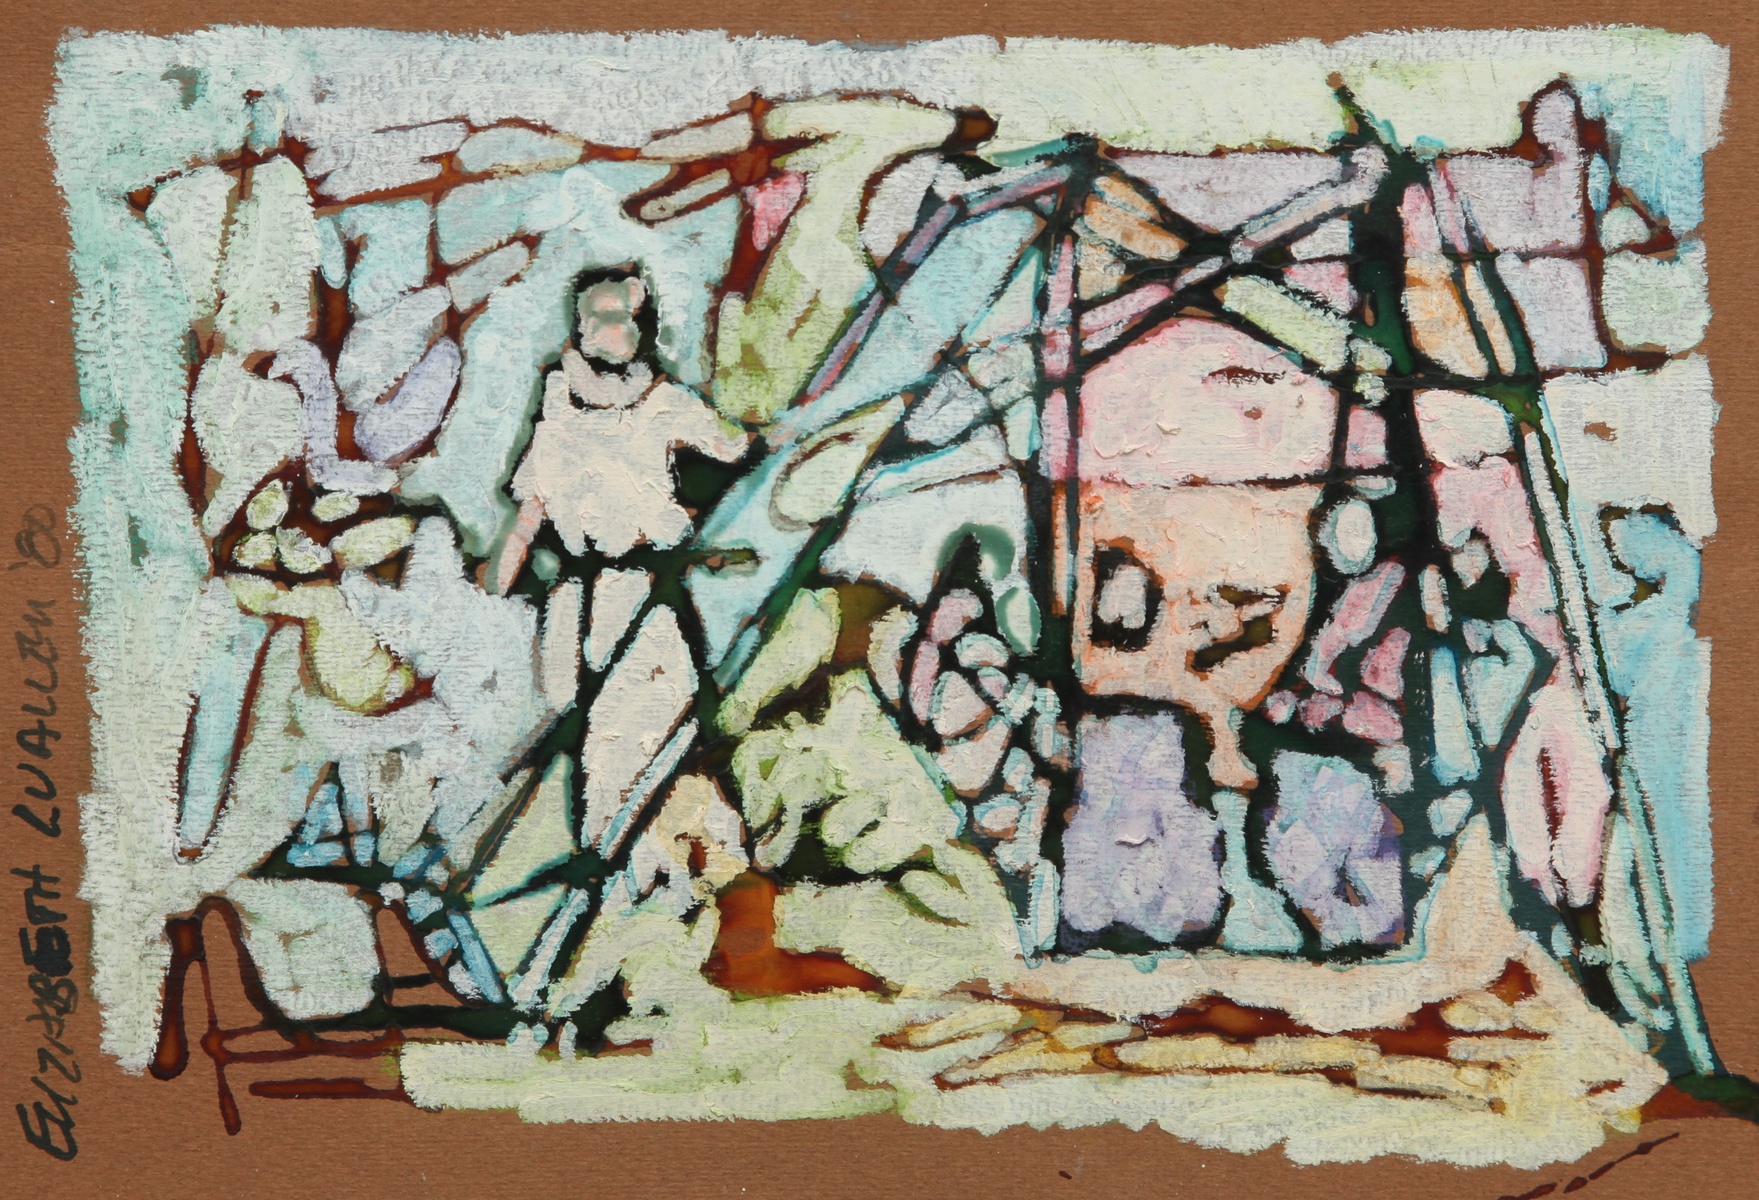 Abstract of children in a swingset with parents looking on.